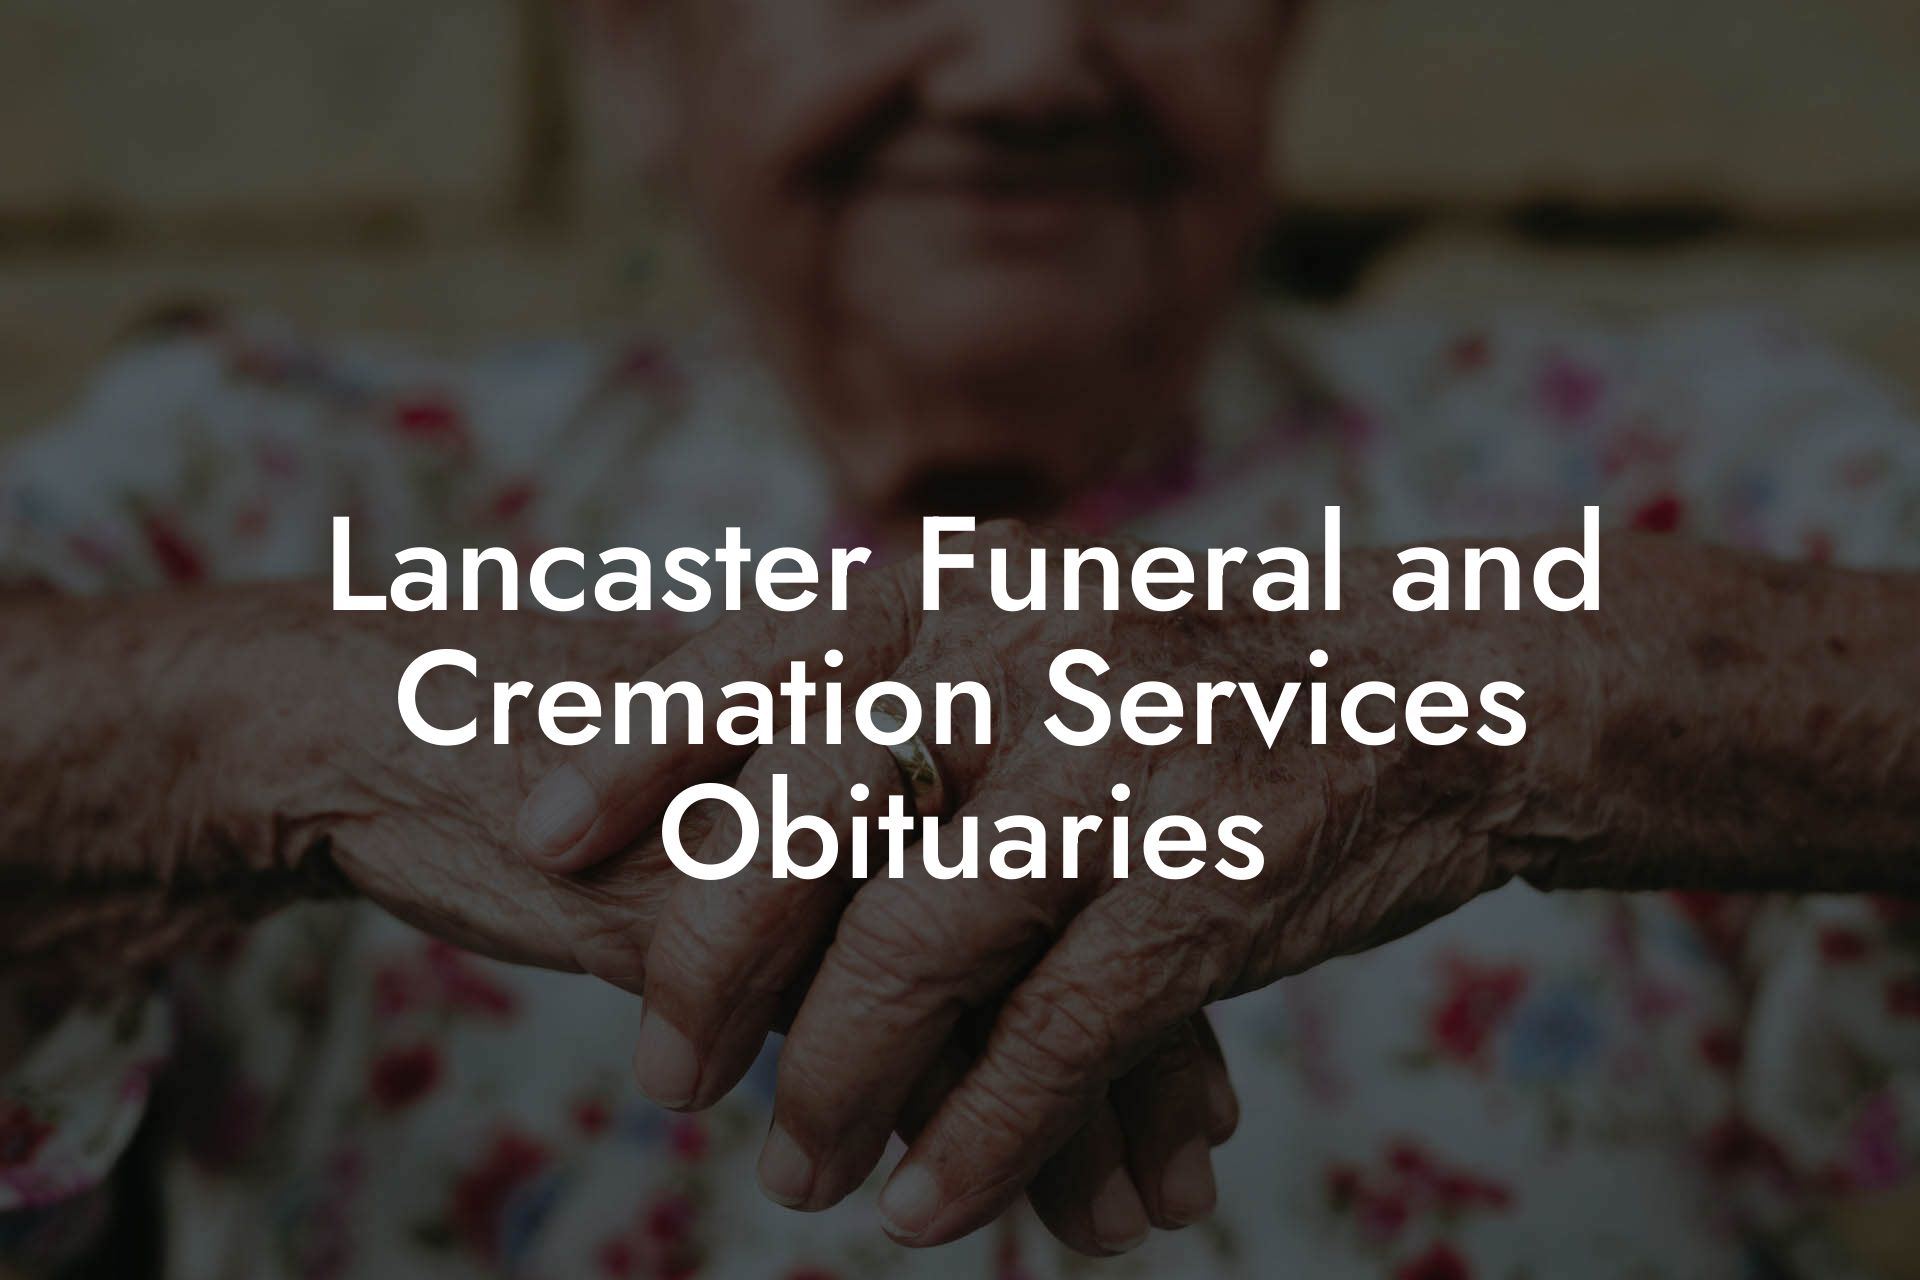 Lancaster Funeral and Cremation Services Obituaries